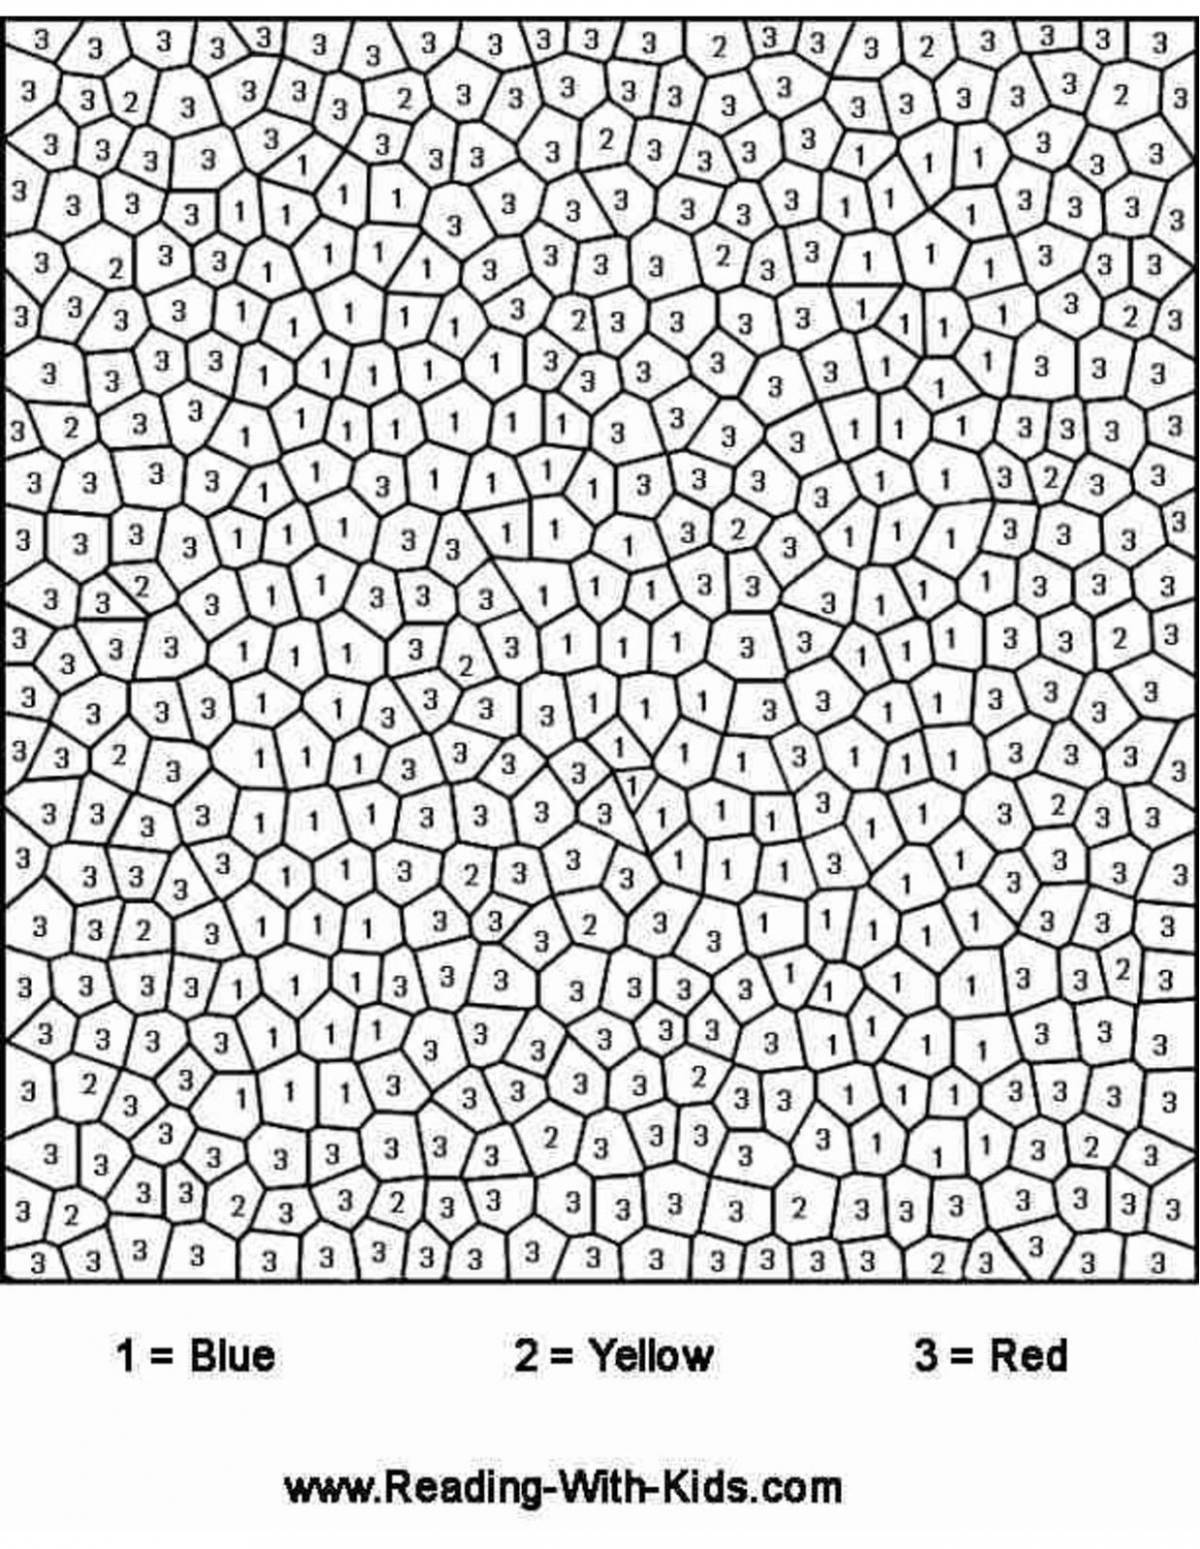 Fun coloring by squares with numbers